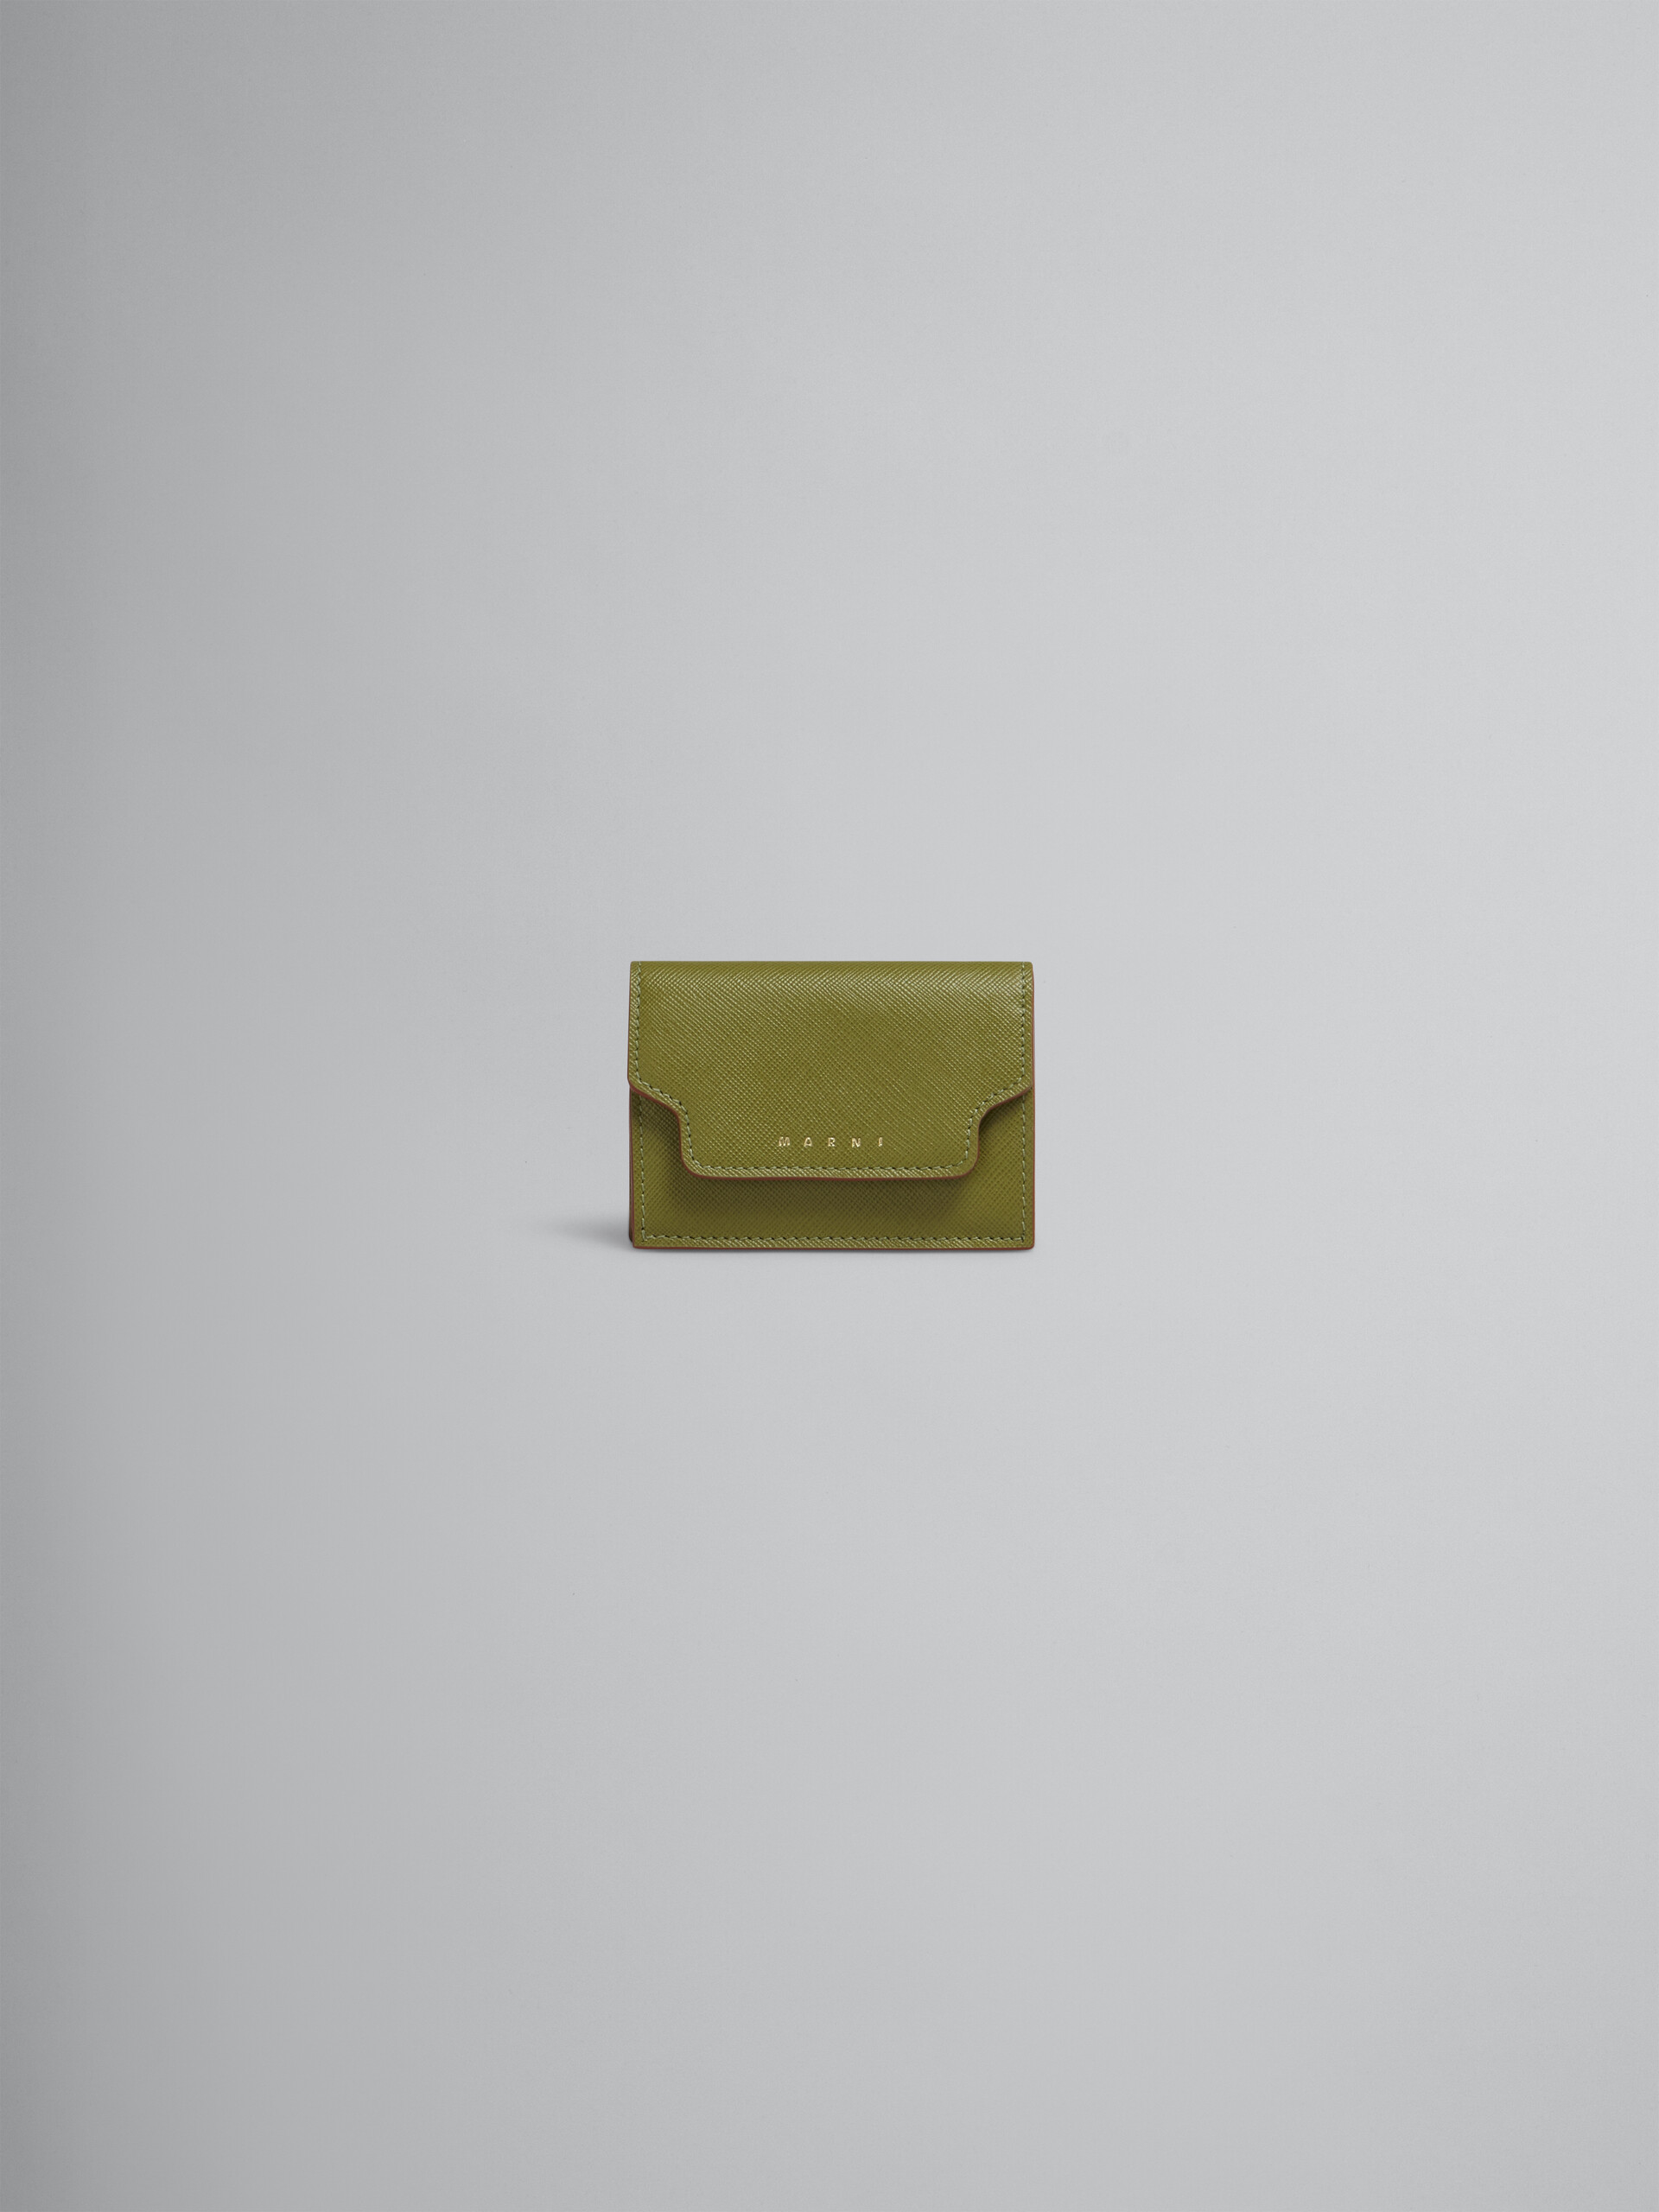 Green saffiano leather tri-fold wallet - Wallets - Image 1